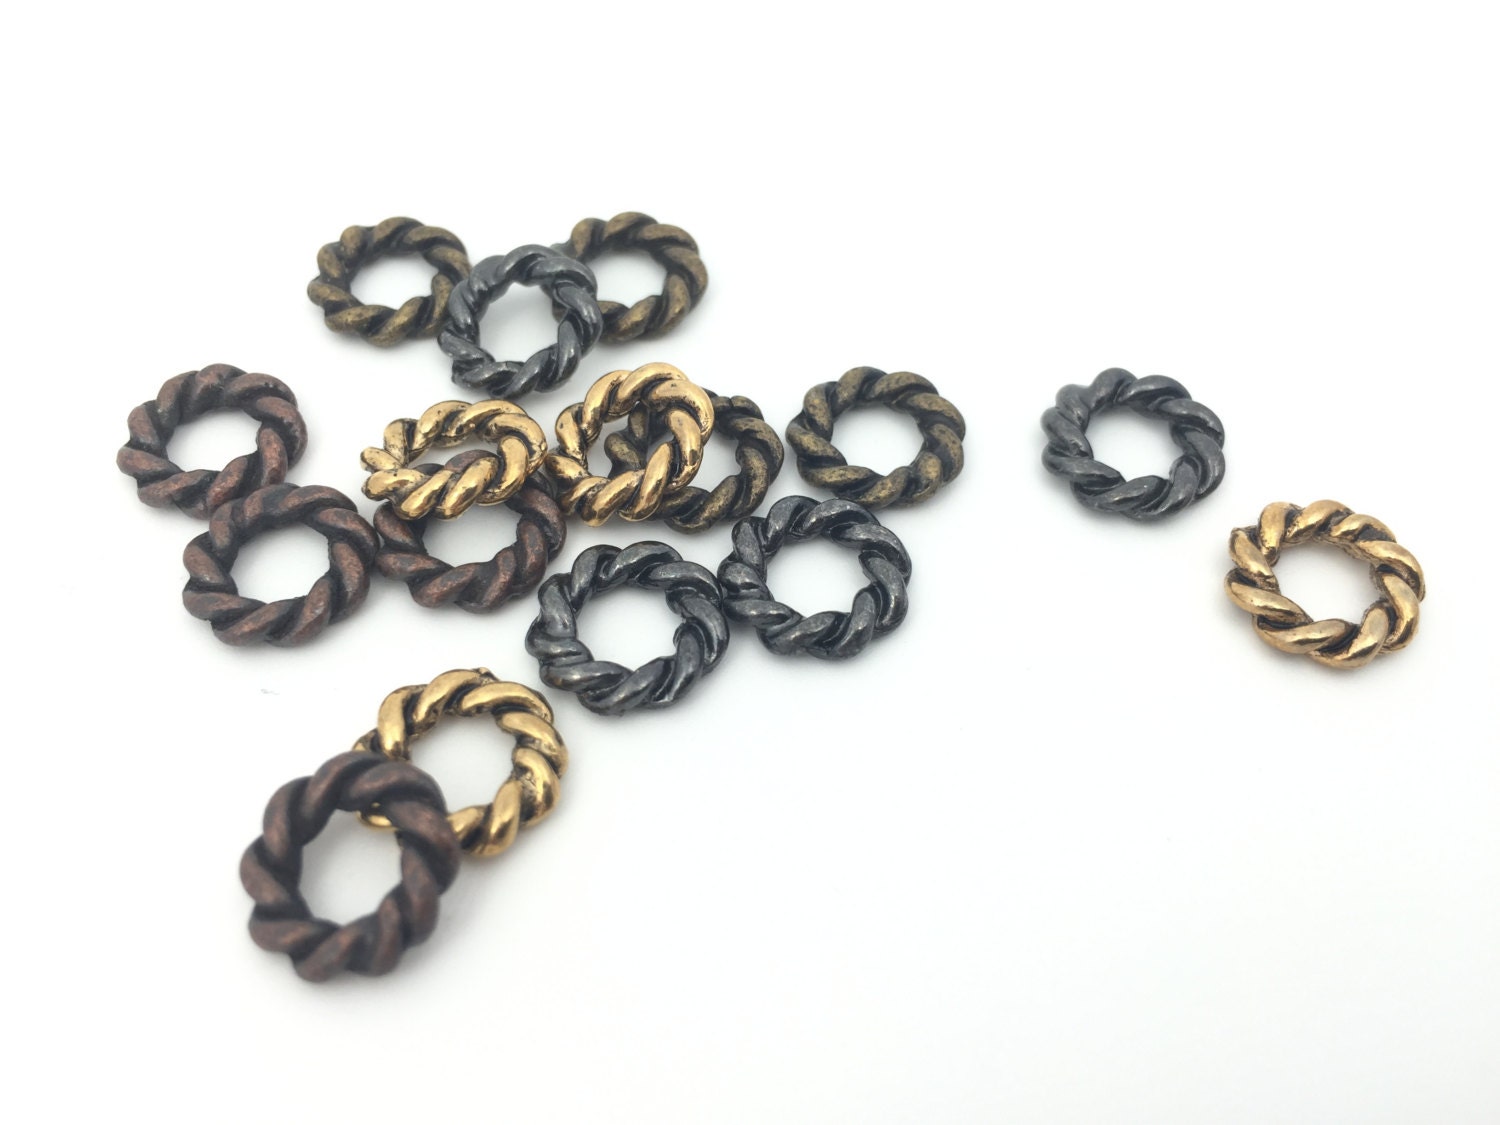 75pcs Metal Ring Spacers Silver 10mm JP106T [JP106T] - $2.00 :  , Wholesale Fashion Jewelry